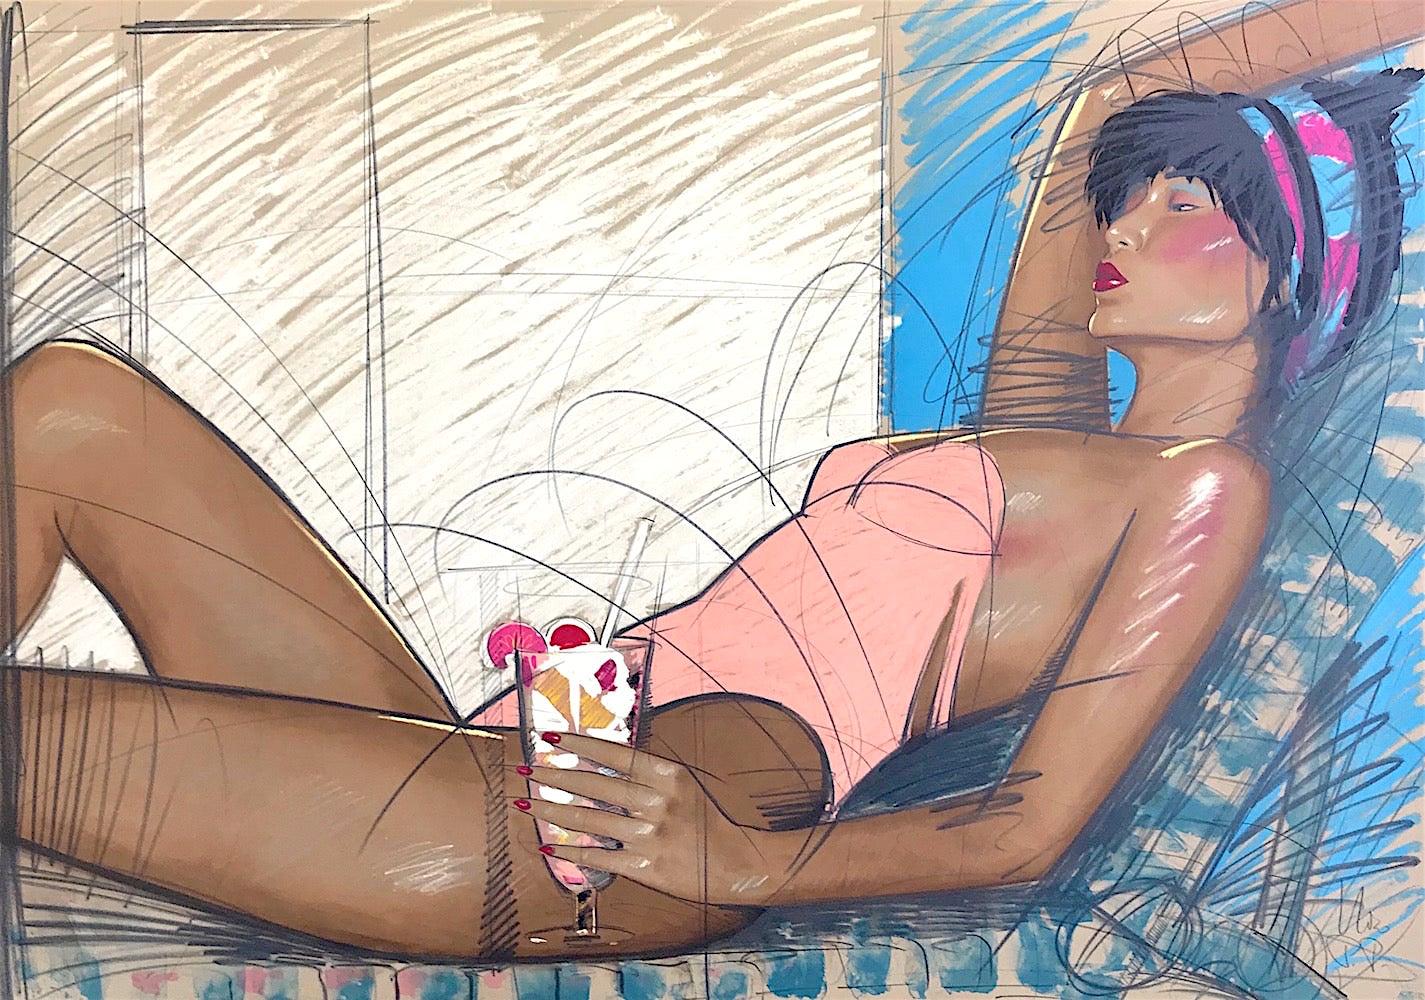 SUNBATHER Signed Lithograph, Reclining Woman Peach Swimsuit Lounge Chair Drink